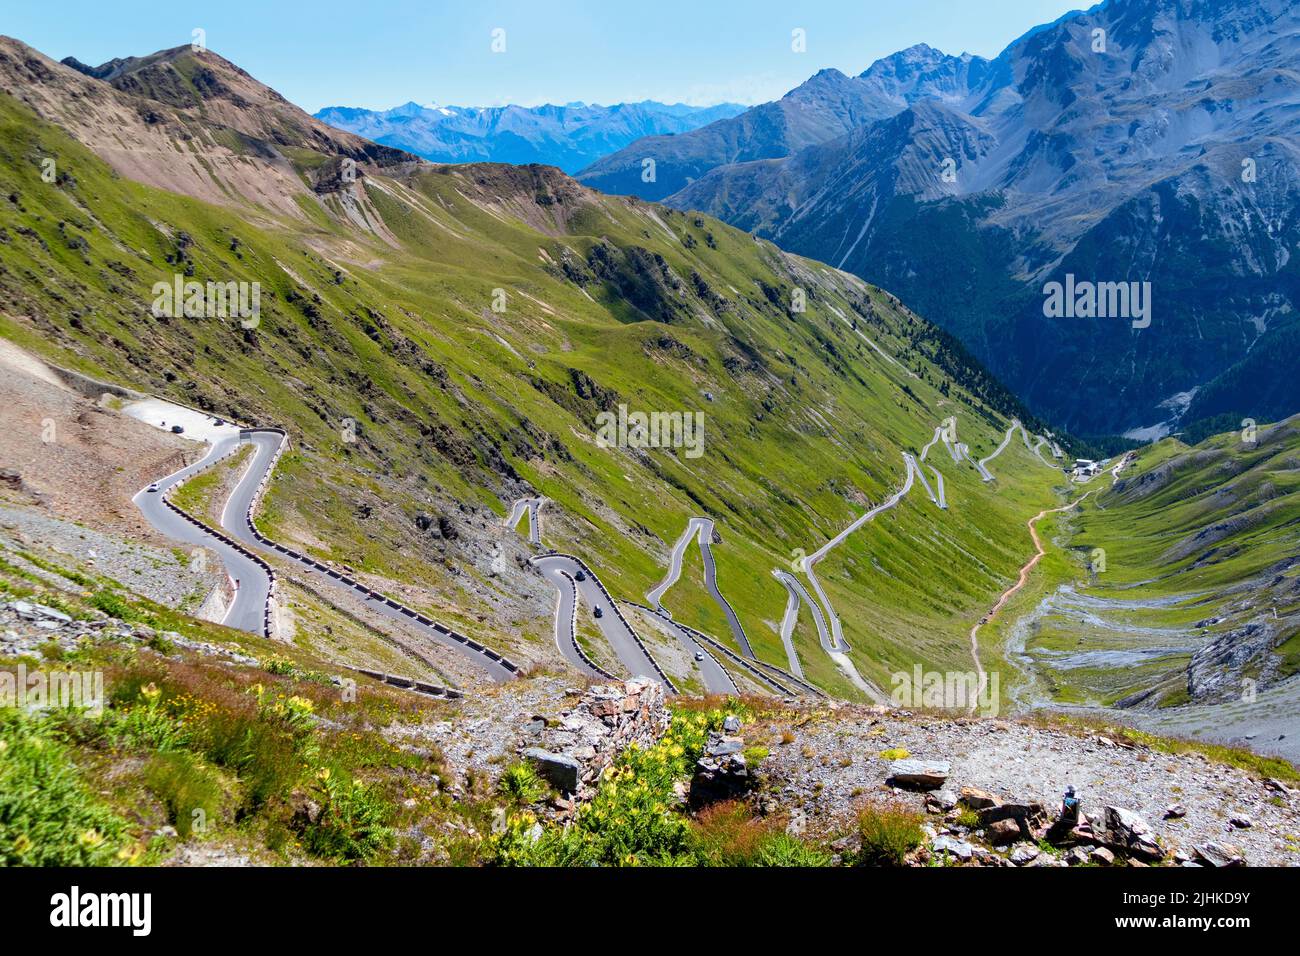 Stilfser Joch/Stelvio Pass Road at 2,758 meters with its 48-hairpin bends in the Ötztaler mountains, Eastern Alps, South Tyrol, Italy. Stock Photo